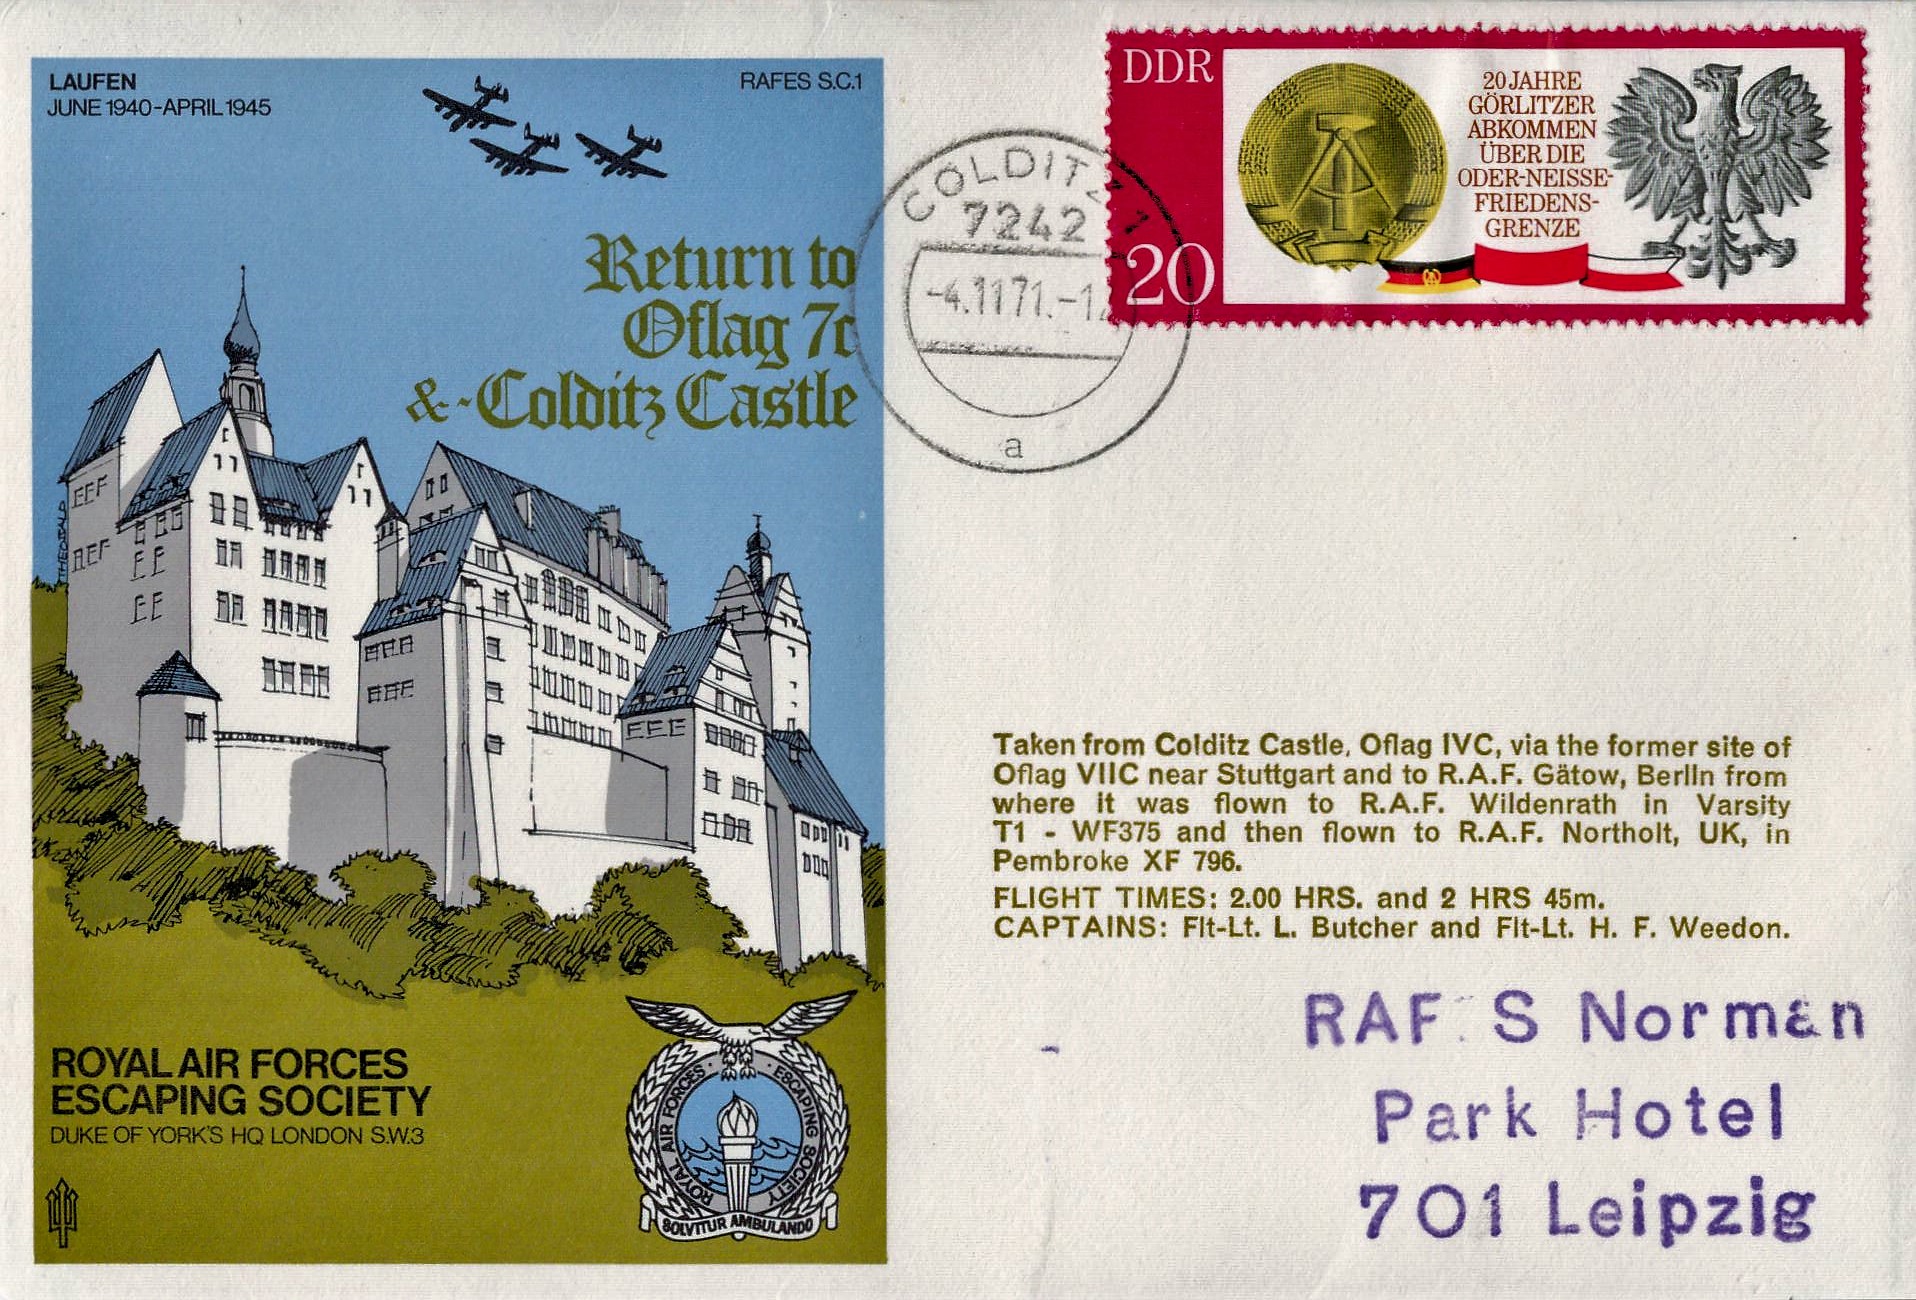 Return to Oflag 7c and Colditz Castle unsigned FDC. Taken from Colditz Castle Oflag IVC via former